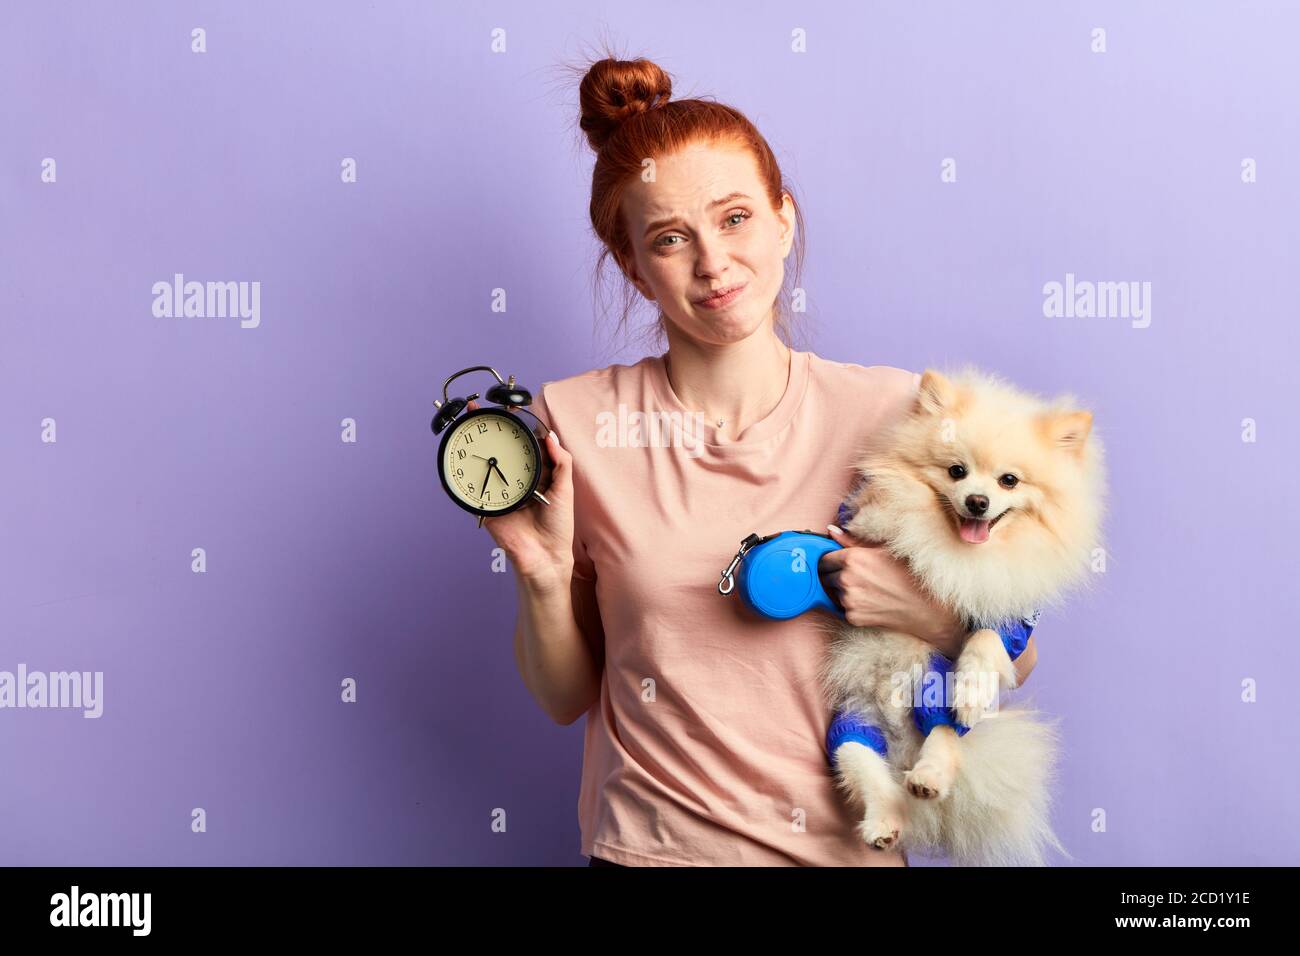 depressed puzzled angry frustrated girl cannot control the daily routine of her pet. close up portrait, isolated blue background, studio shot. Stock Photo